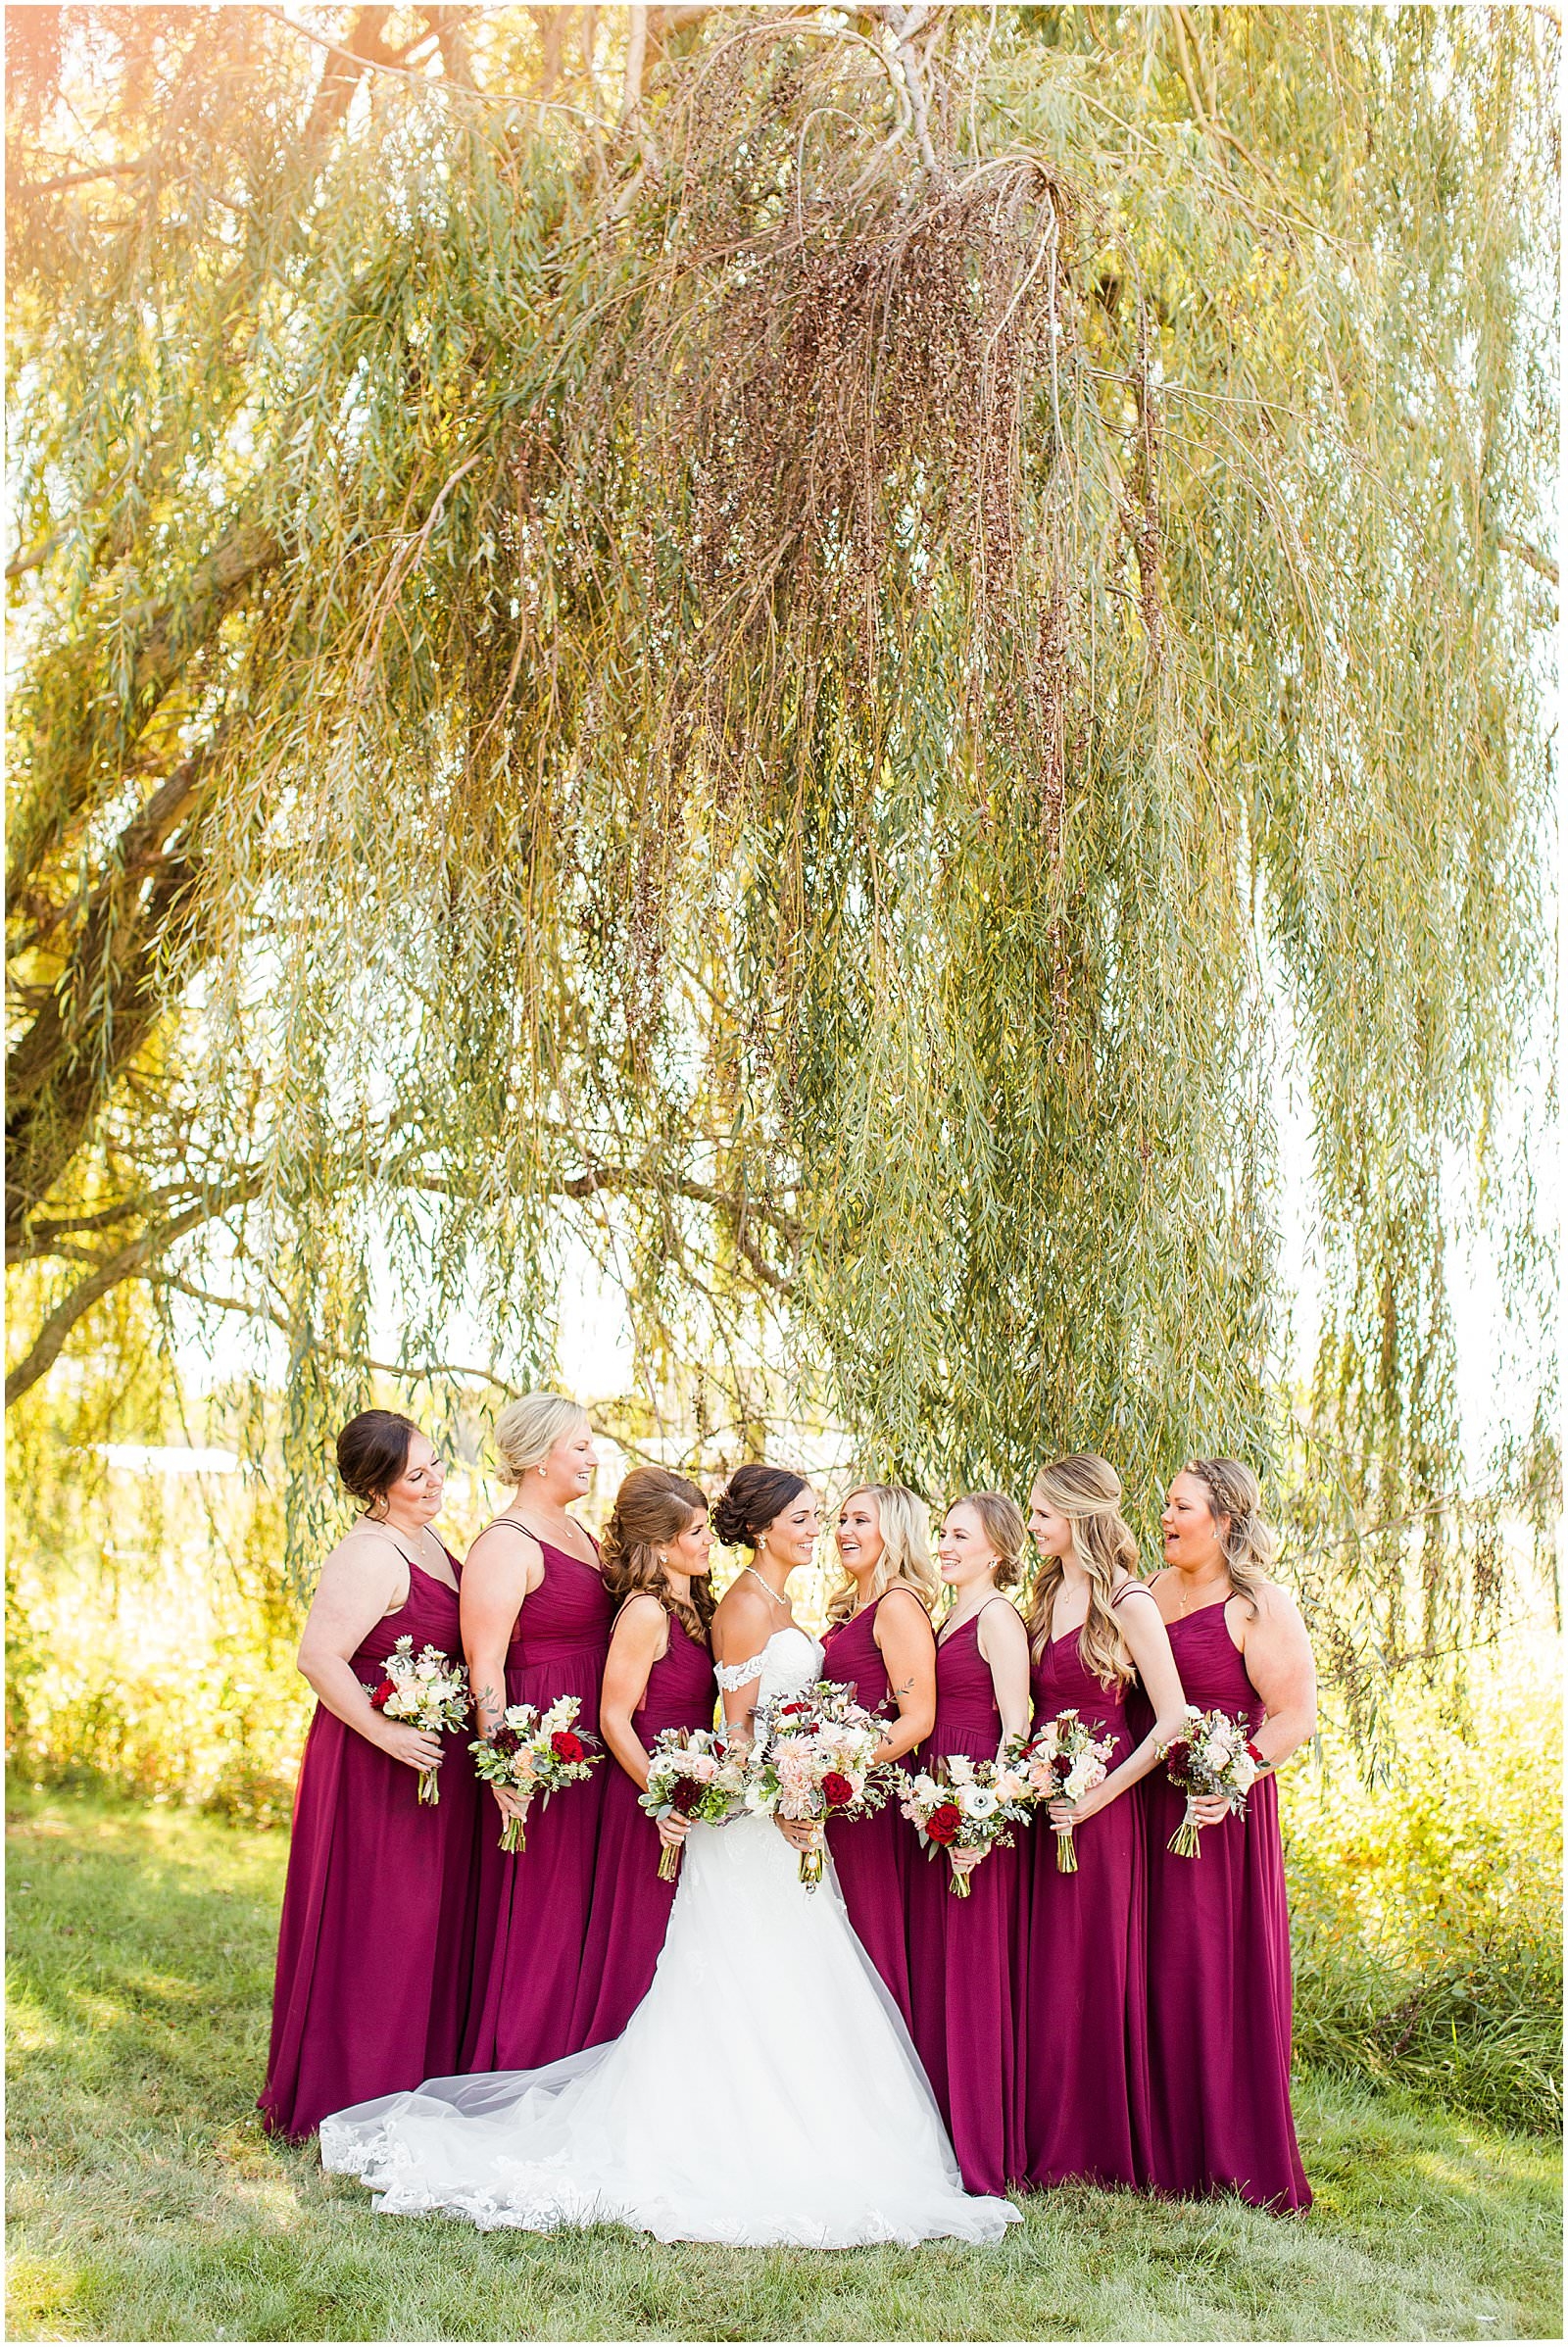 A Stunning Fall Wedding in Indianapolis, IN |. Sally and Andrew | Bret and Brandie Photography 0080.jpg